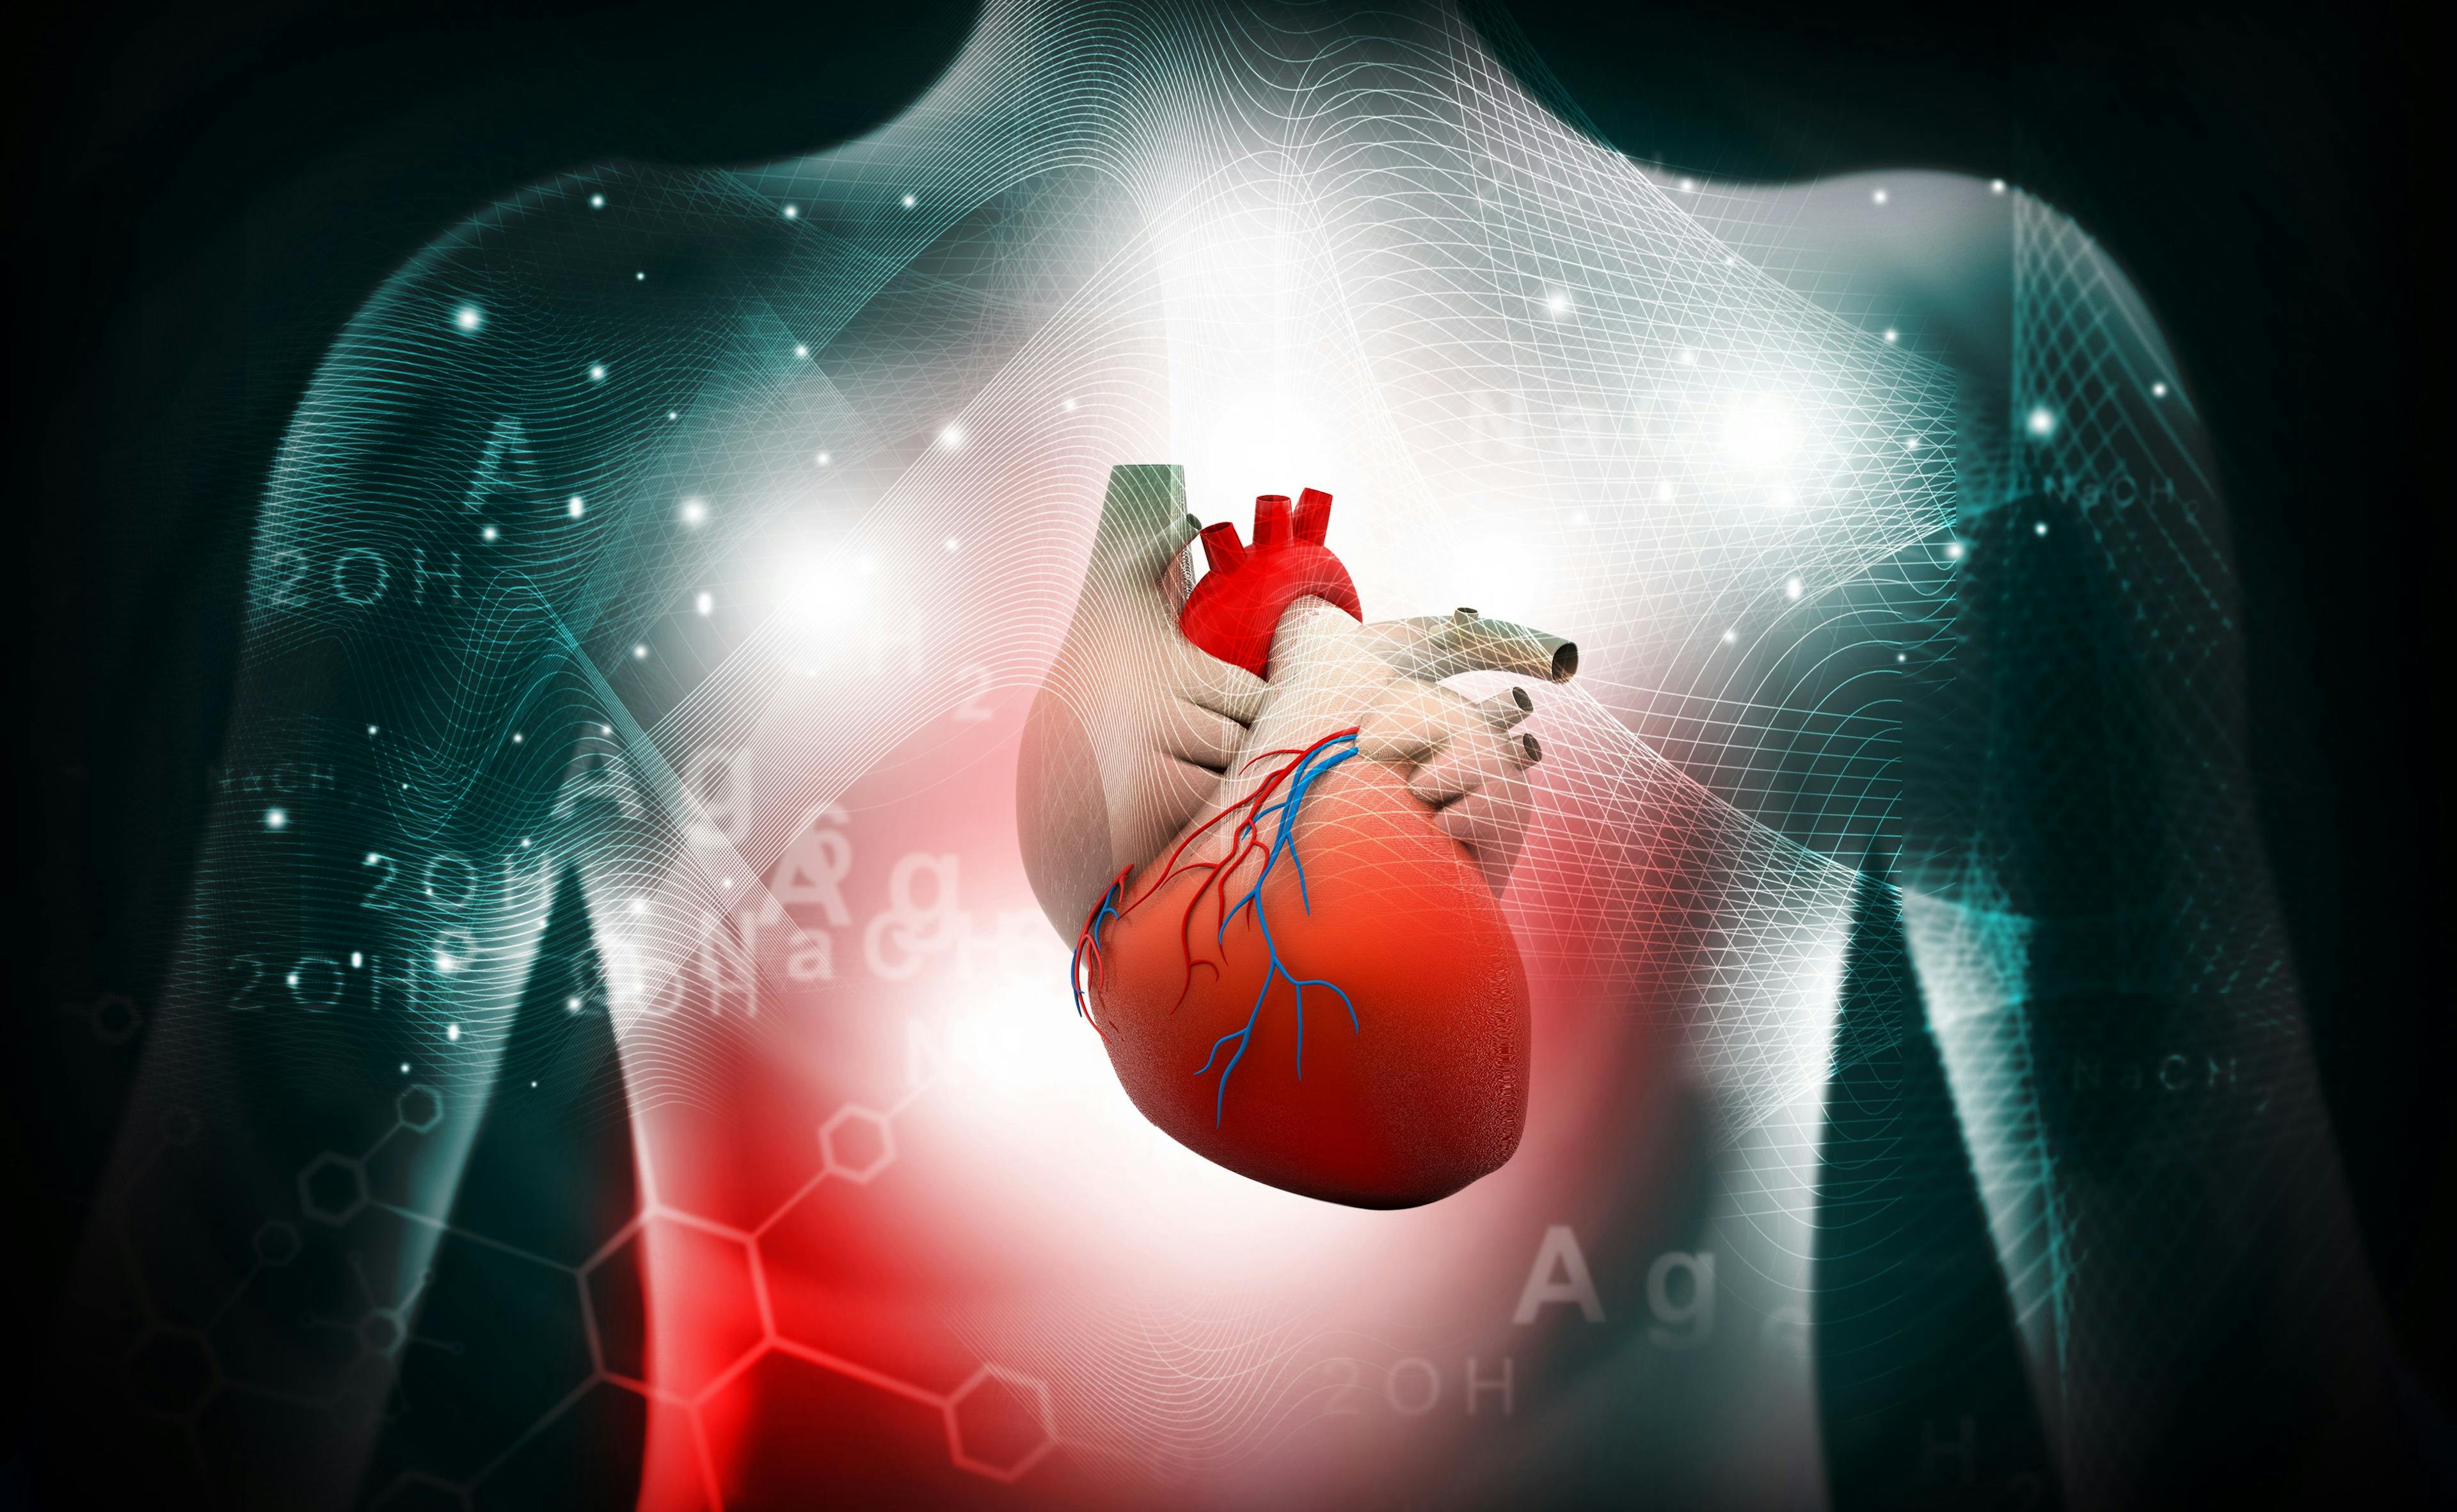 Empagliflozin Improved Outcomes for Patients With Heart Failure, Chronic Kidney Disease